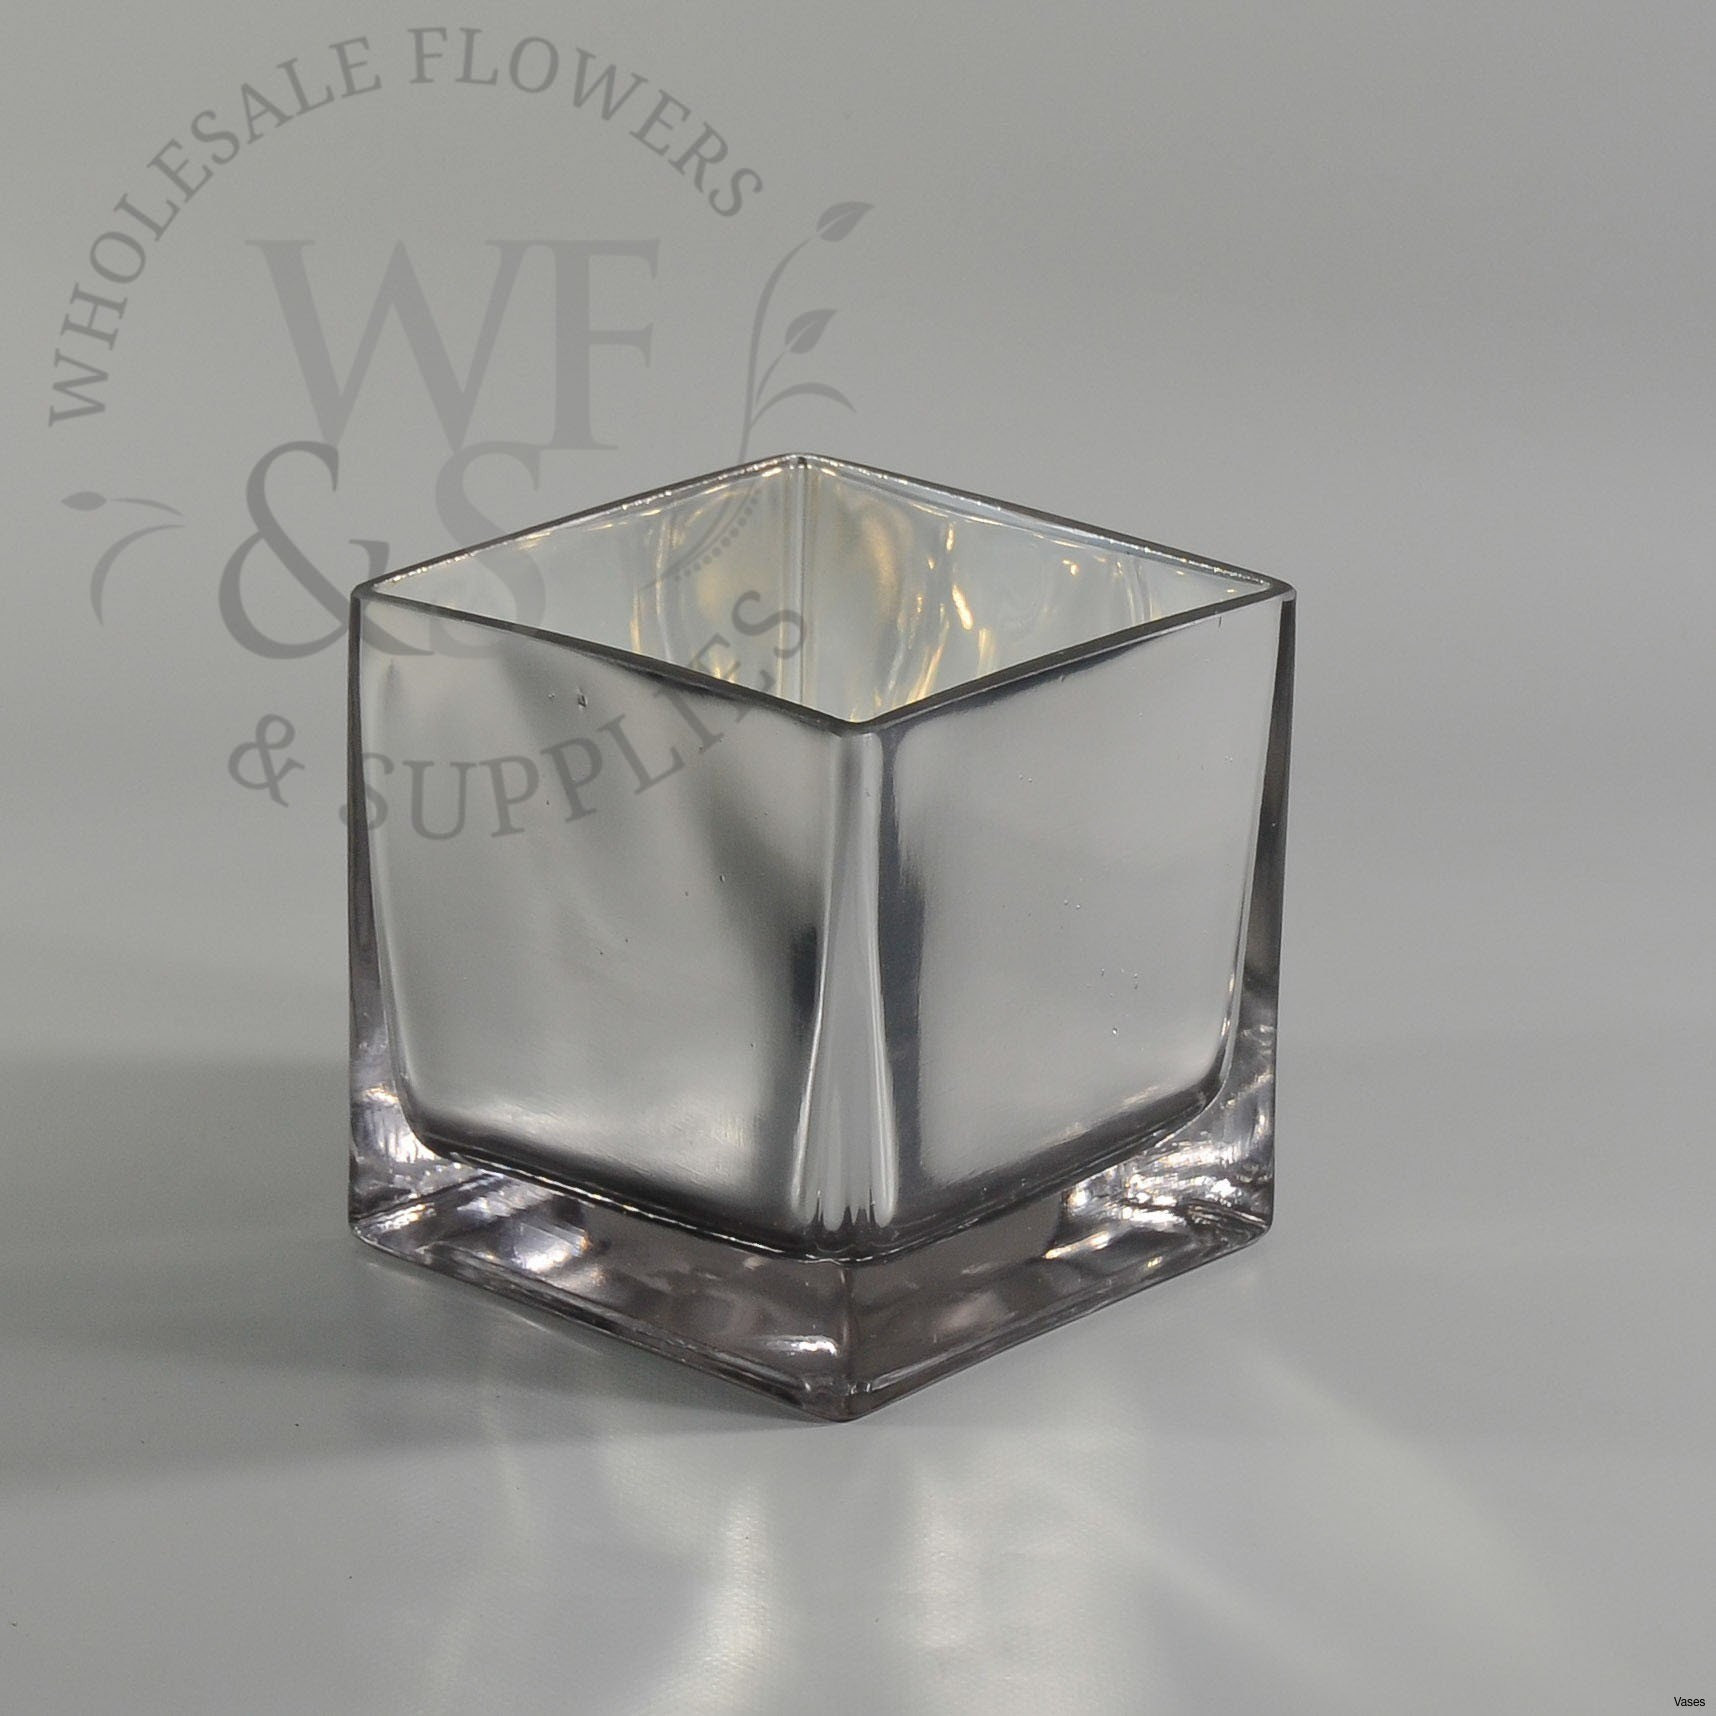 21 Lovely Clear Cube Vase 2024 free download clear cube vase of 20 beautiful square black vases bogekompresorturkiye com within square mirrors lovely mirrored square vase 3h vases mirror table decorationi 0d weddings